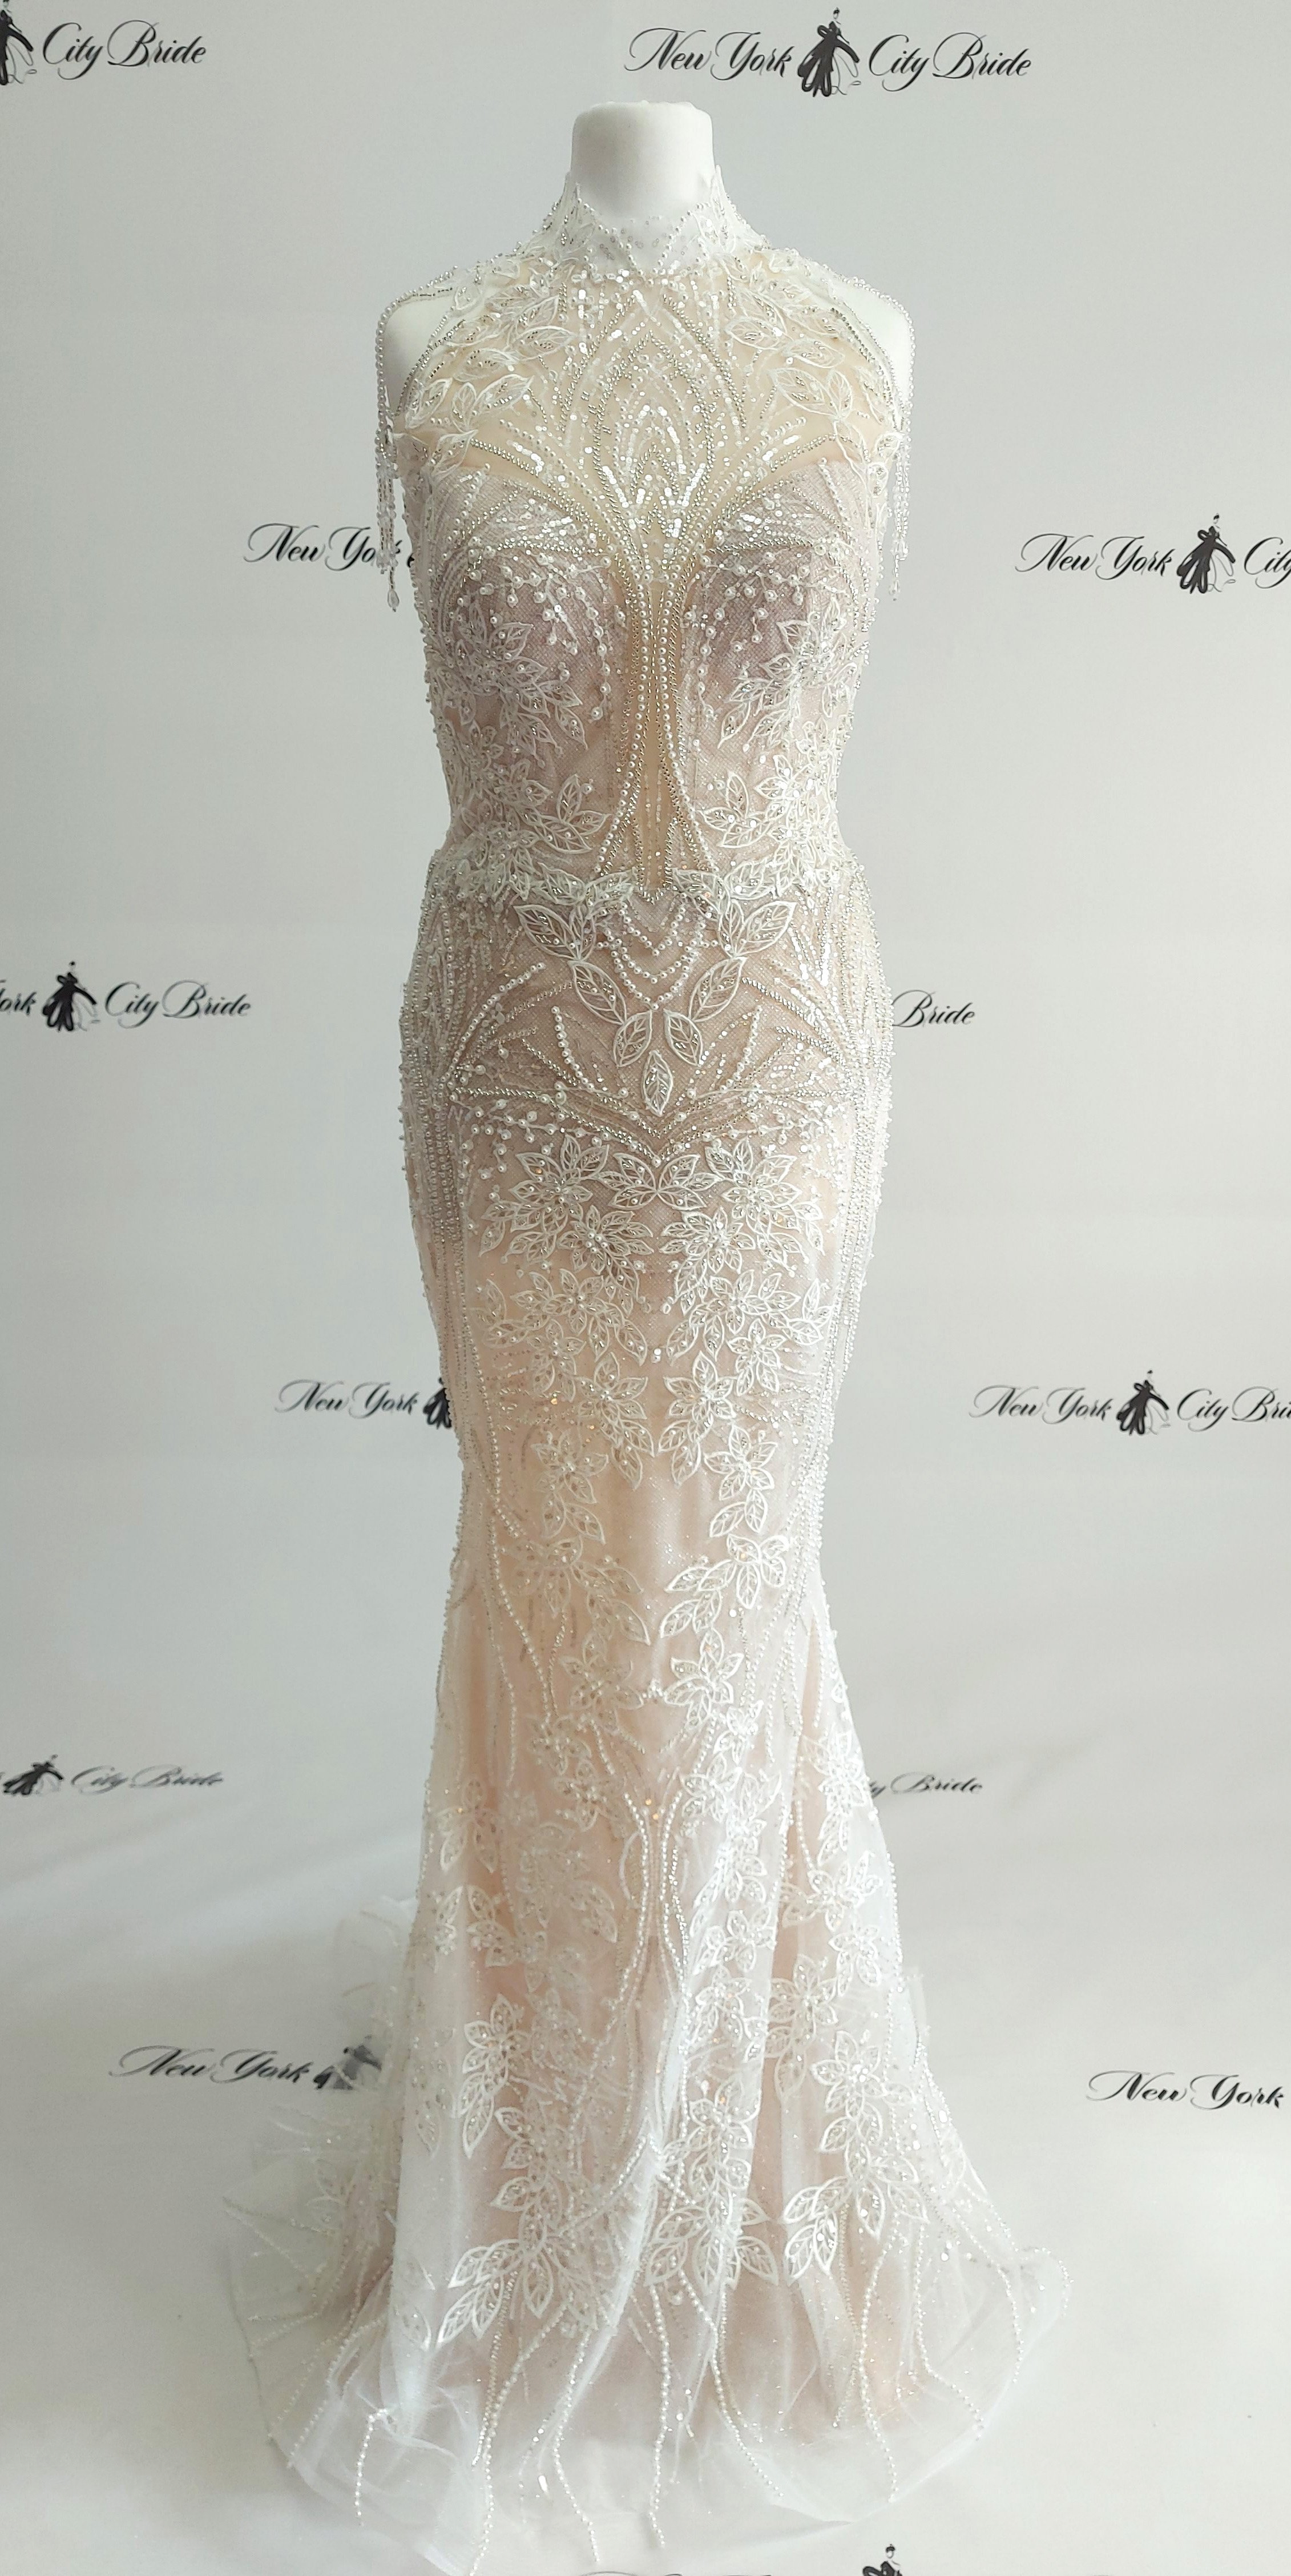 Beaded sparkle Wedding dress Indira Product for Sale at NY City Bride